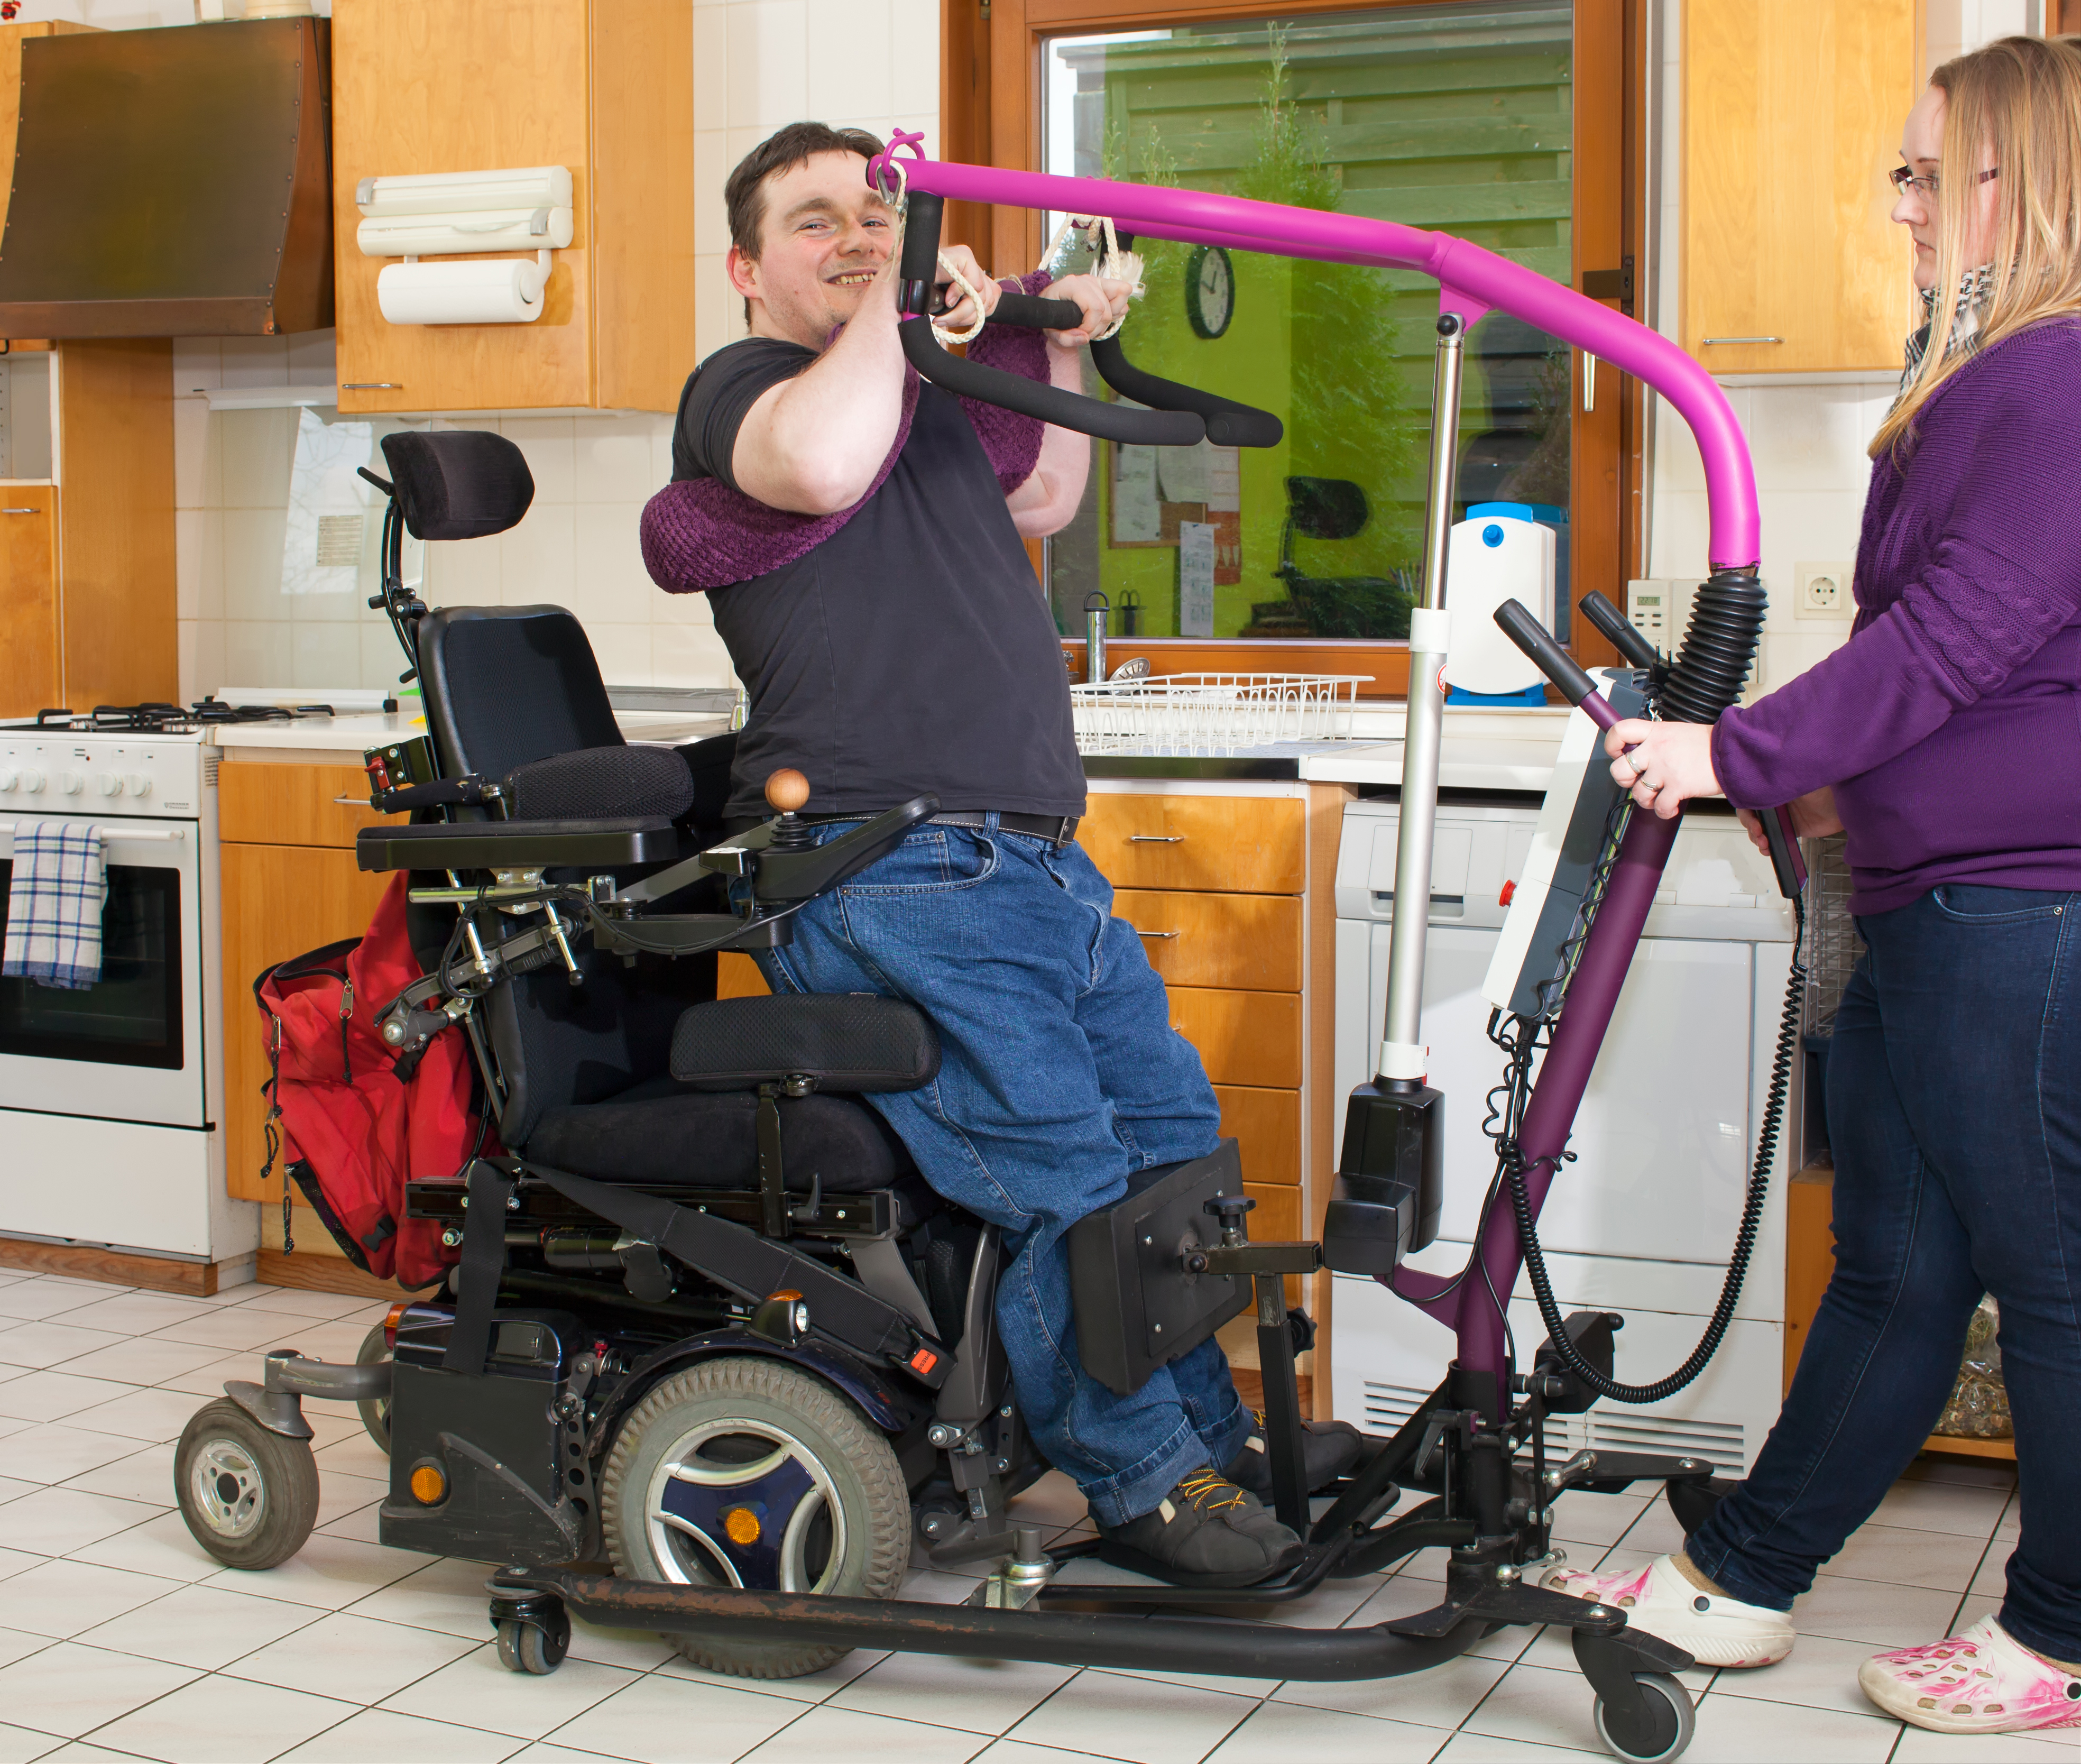 A man in a wheelchair is standing up using lifting equipment, with a provider standing nearby